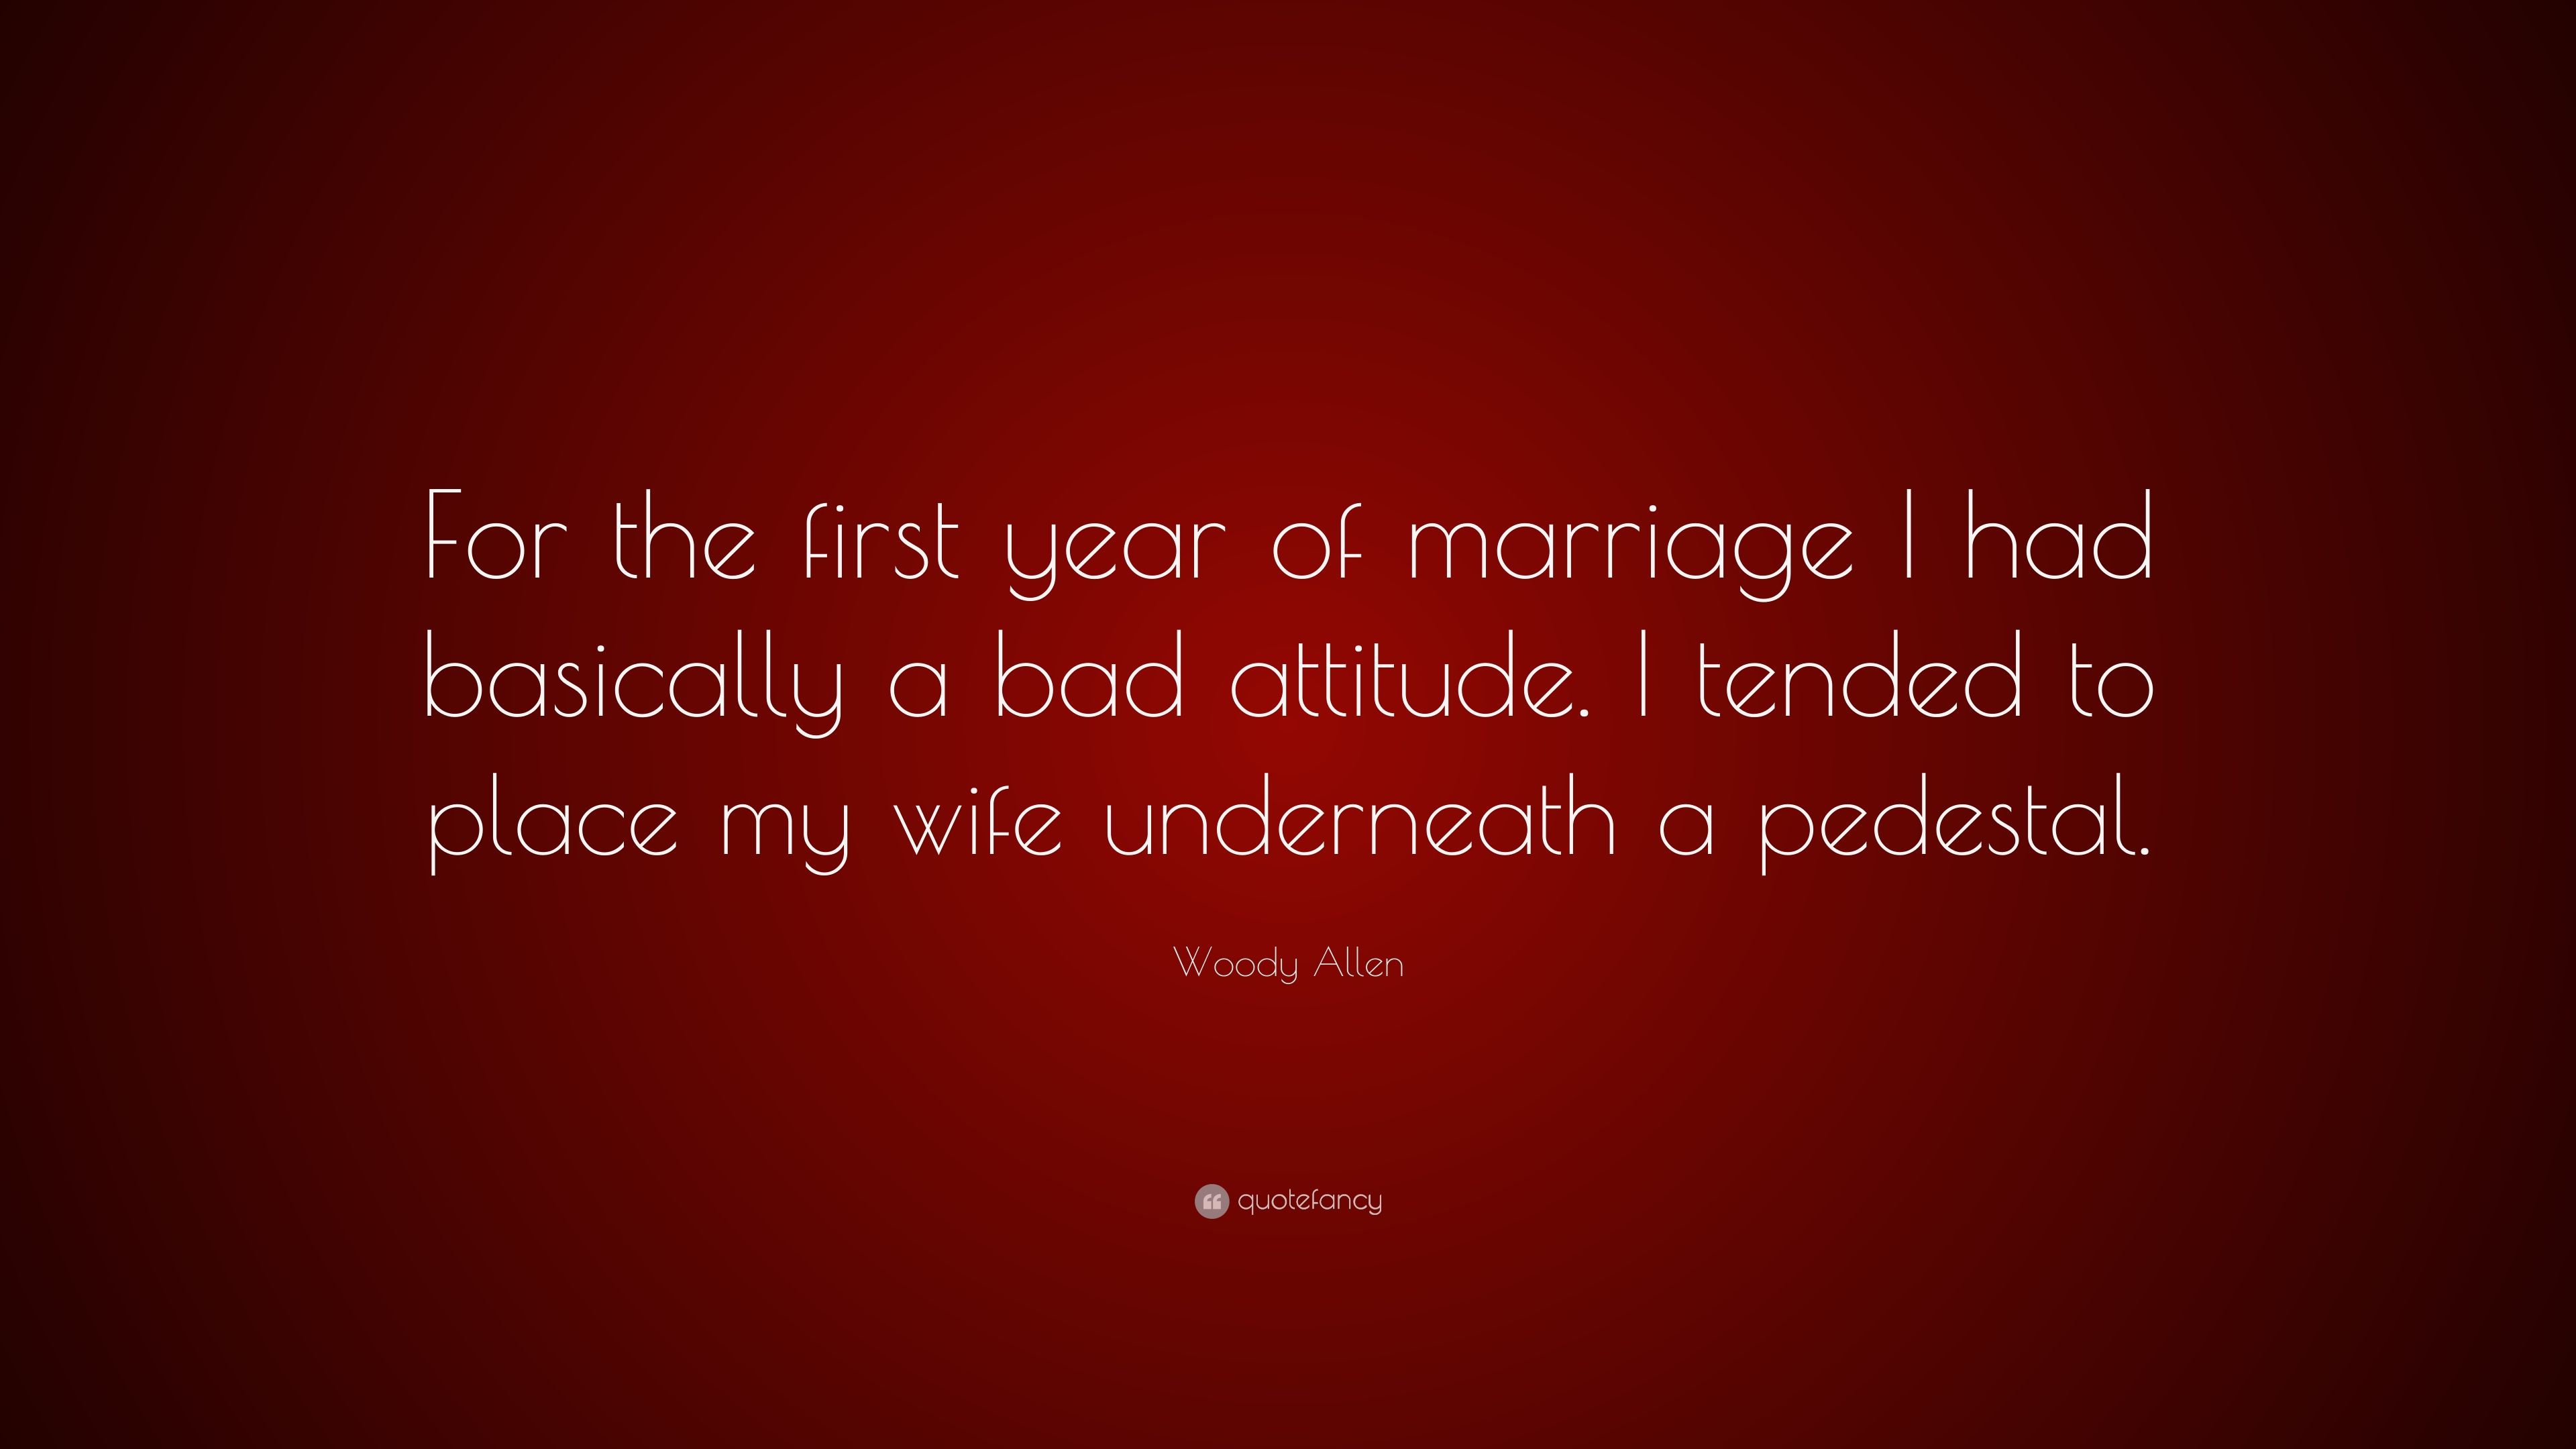 Woody Allen Quote: “For the first year of marriage I had basically a bad attitude. I tended to place my wife underneath a pedestal.” (7 wallpaper)